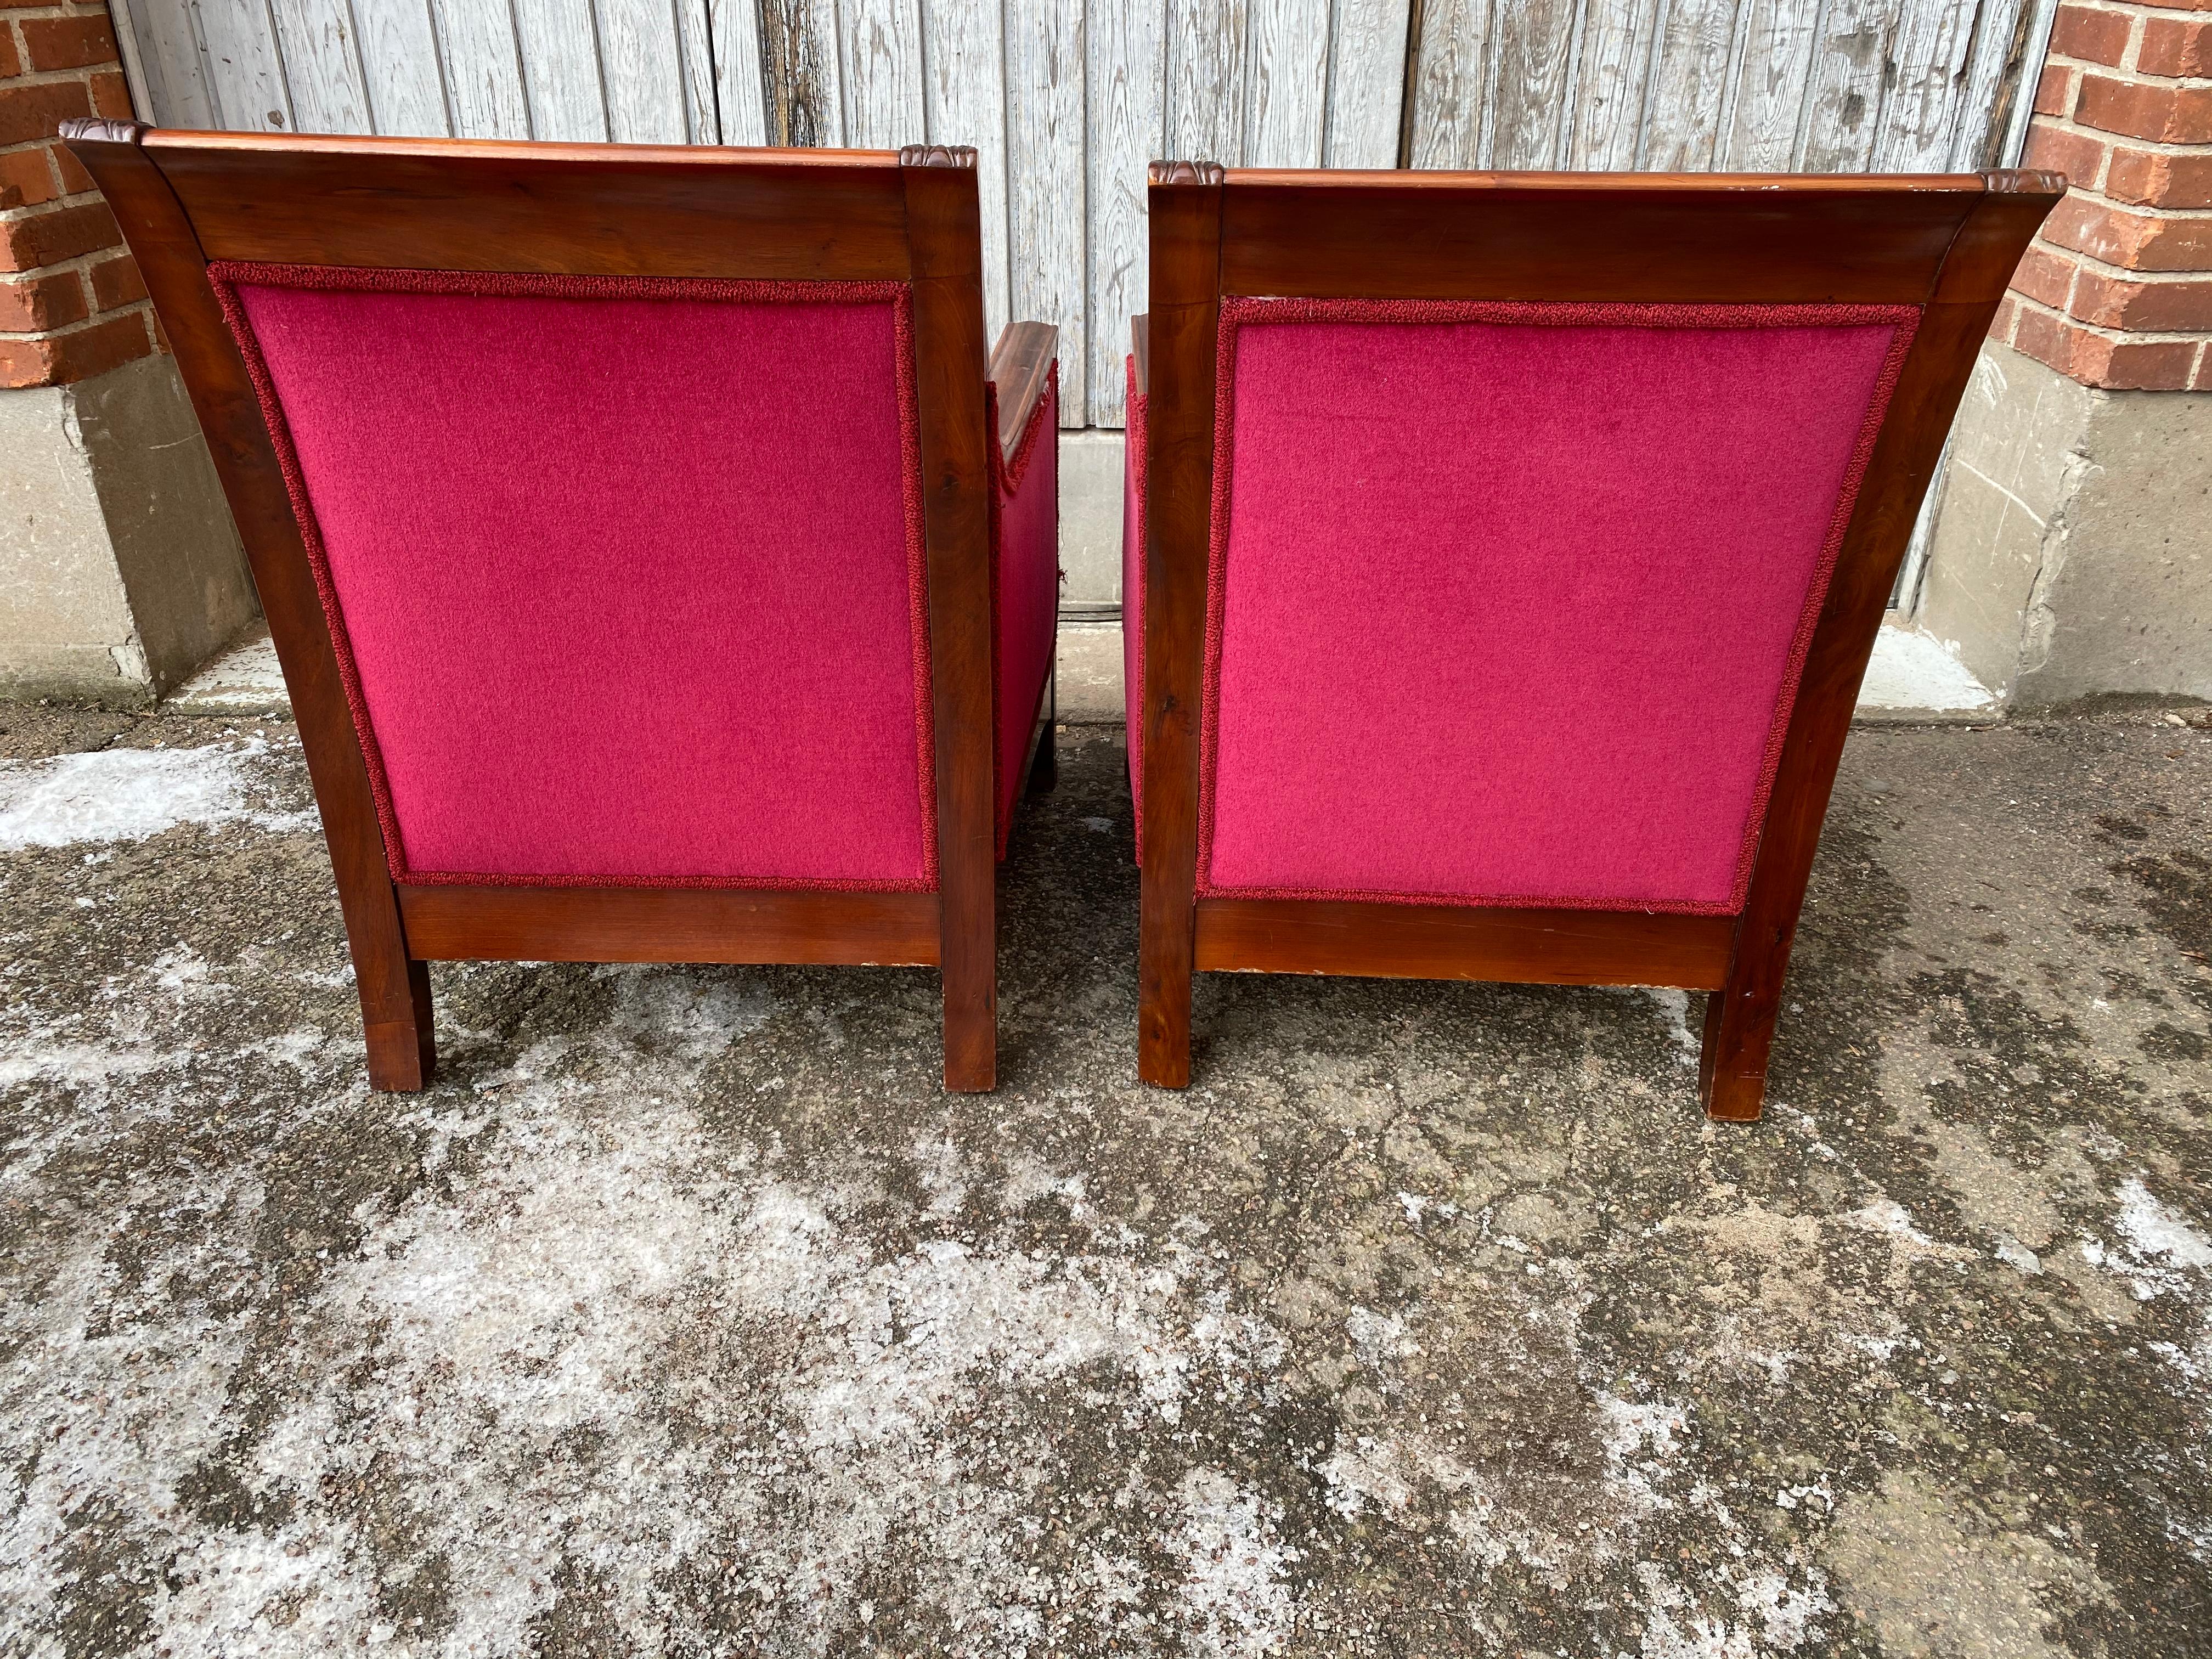 Pair of Large Swedish Jugend Mahogany Armchairs in Red Velvet Fabric 1